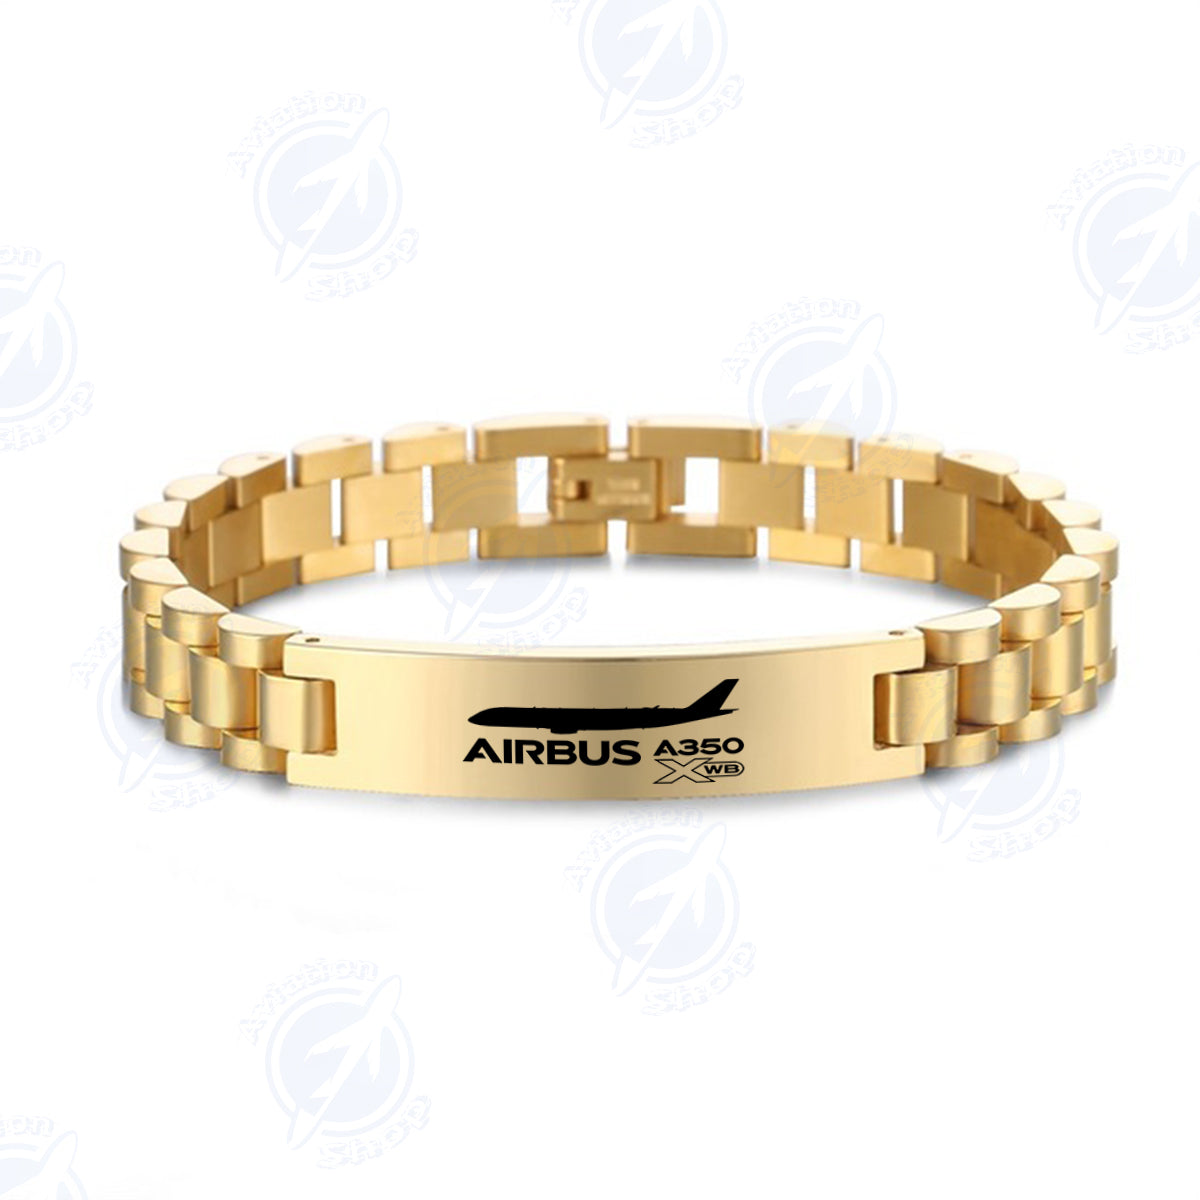 The Airbus A350 WXB Designed Stainless Steel Chain Bracelets